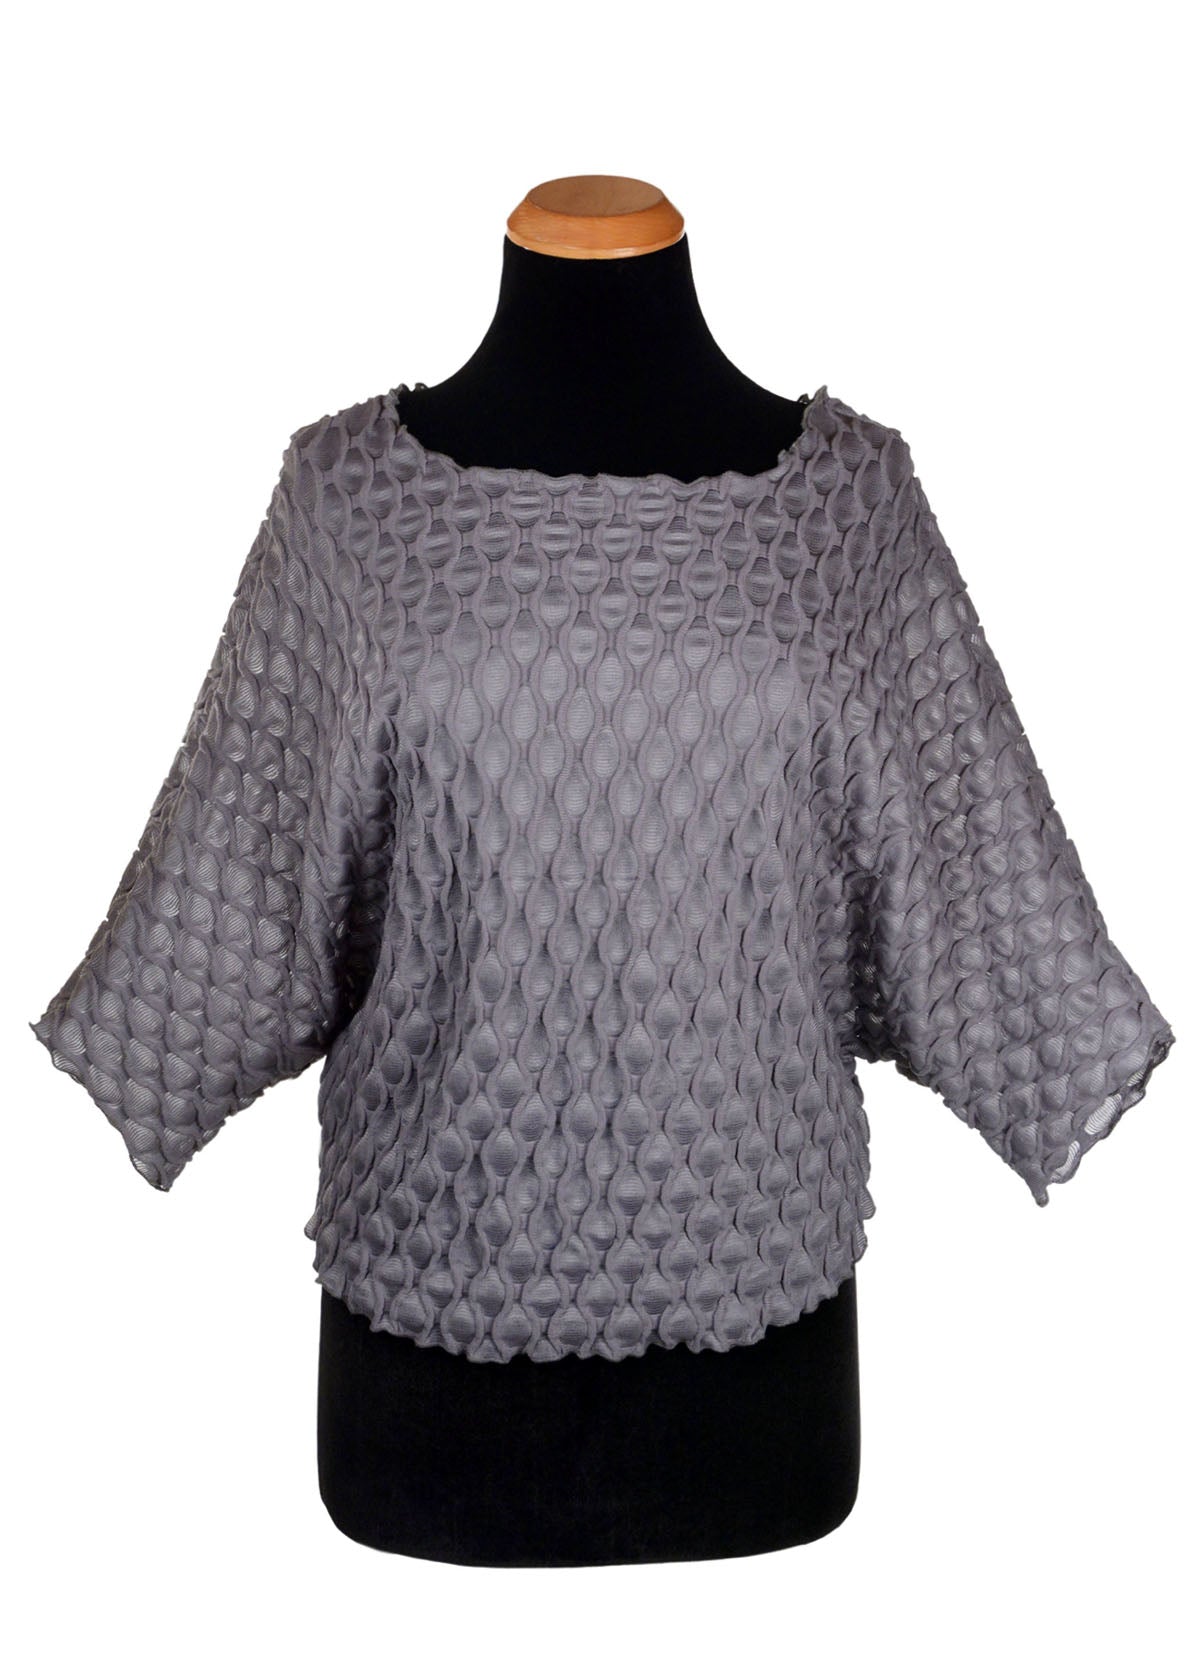 Product photo of the Batwing Top in Gray, from the Fractal Collection. LYC and Pandemonium Seattle are handmade in Seattle, WA, USA.